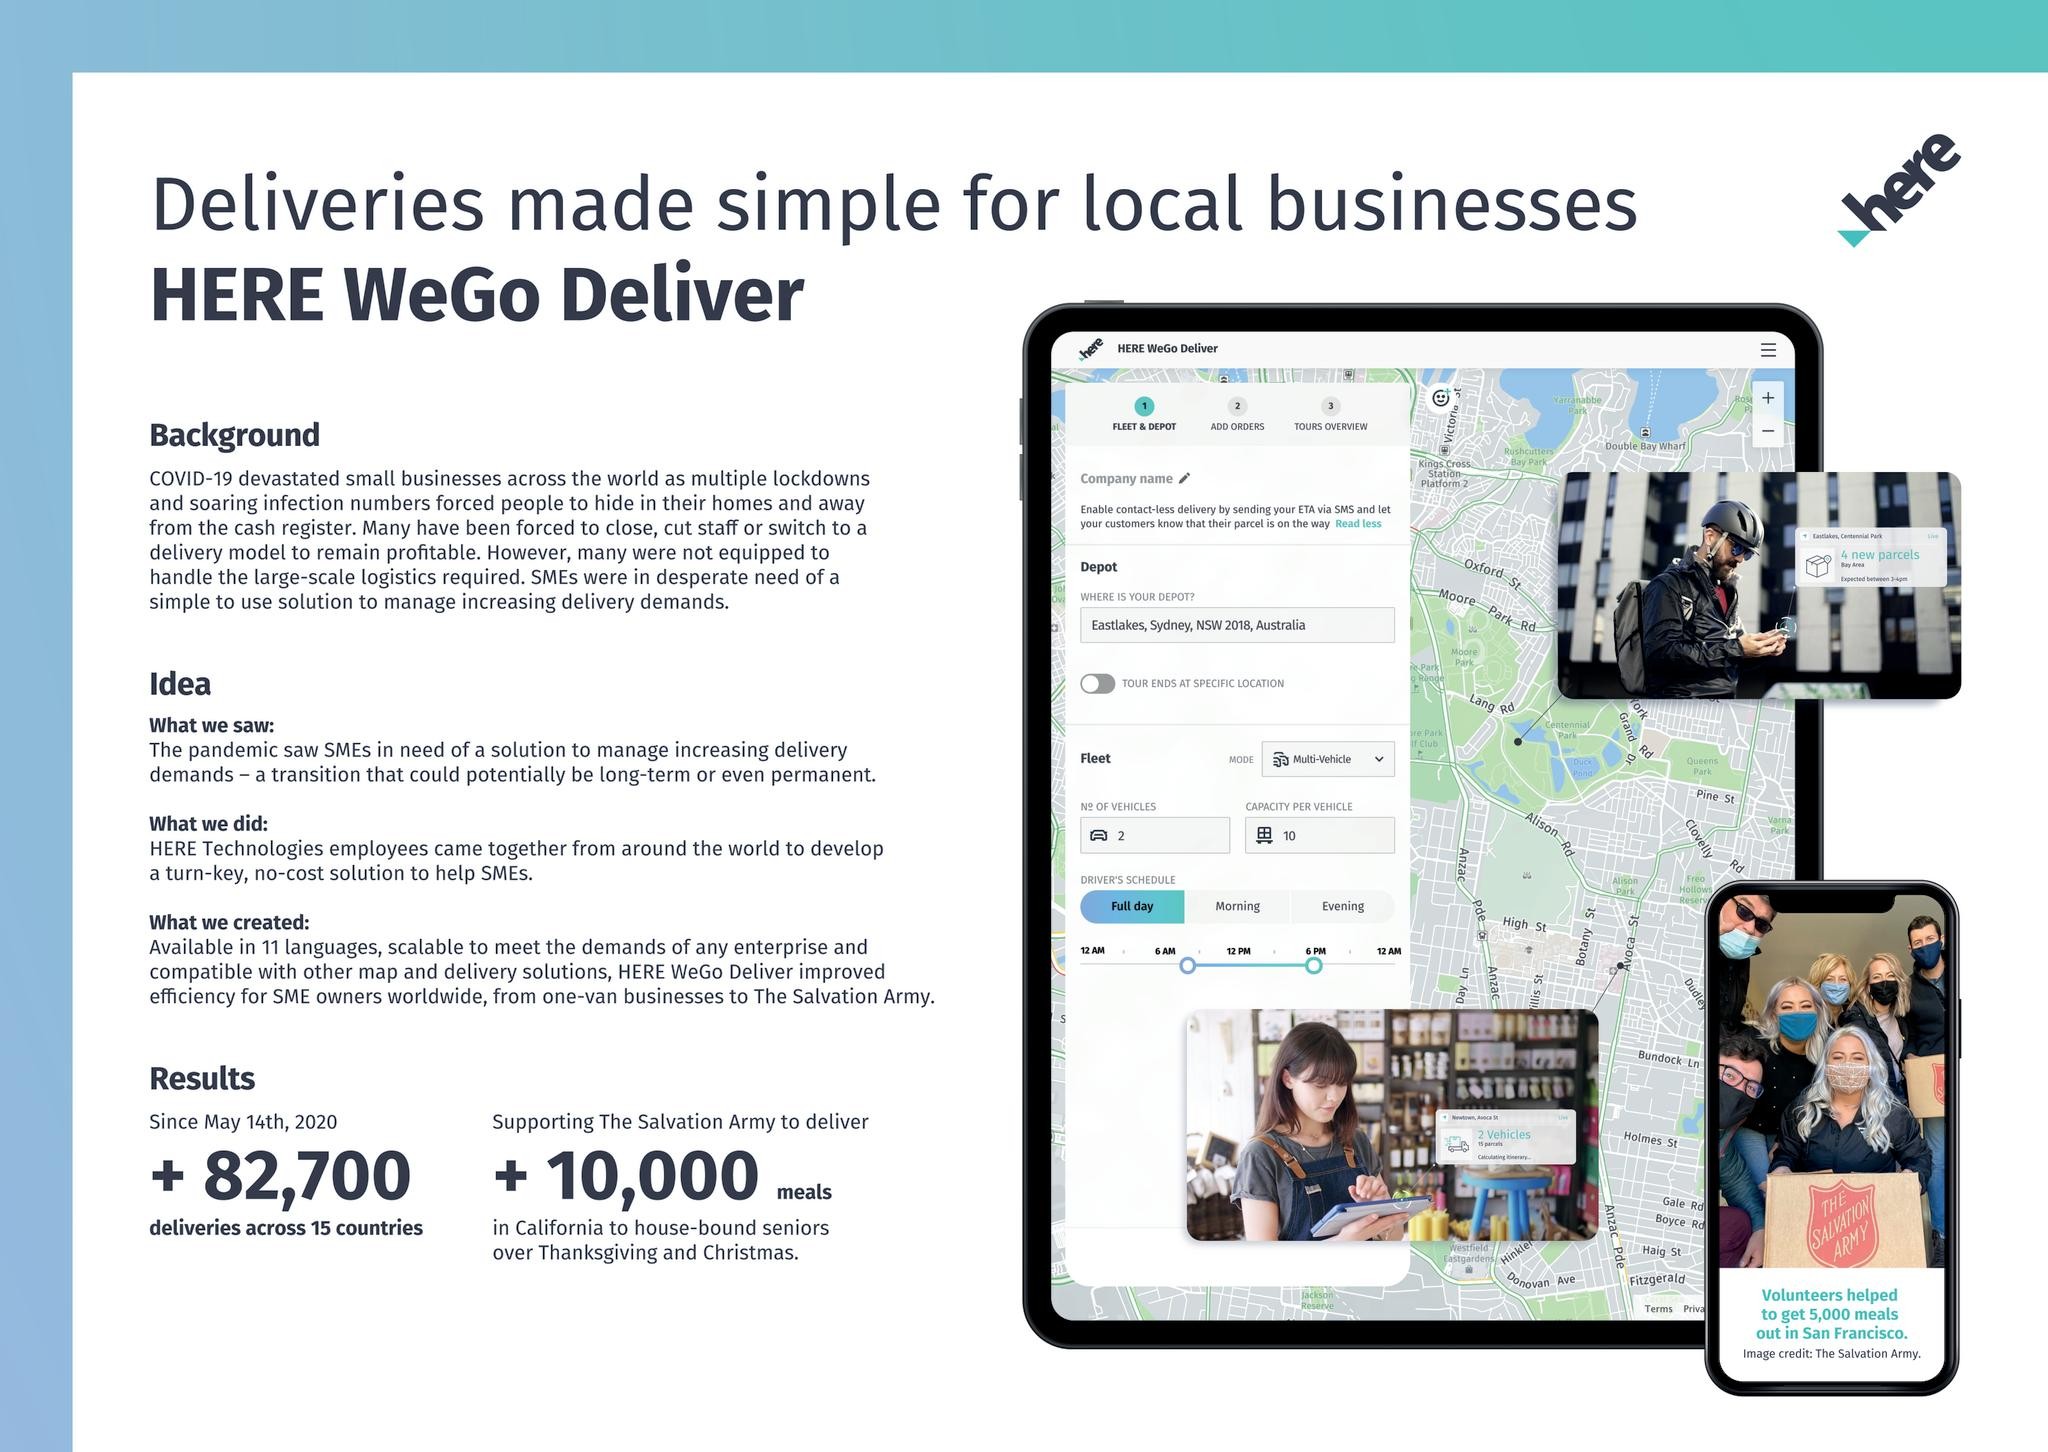 HERE WeGo Deliver